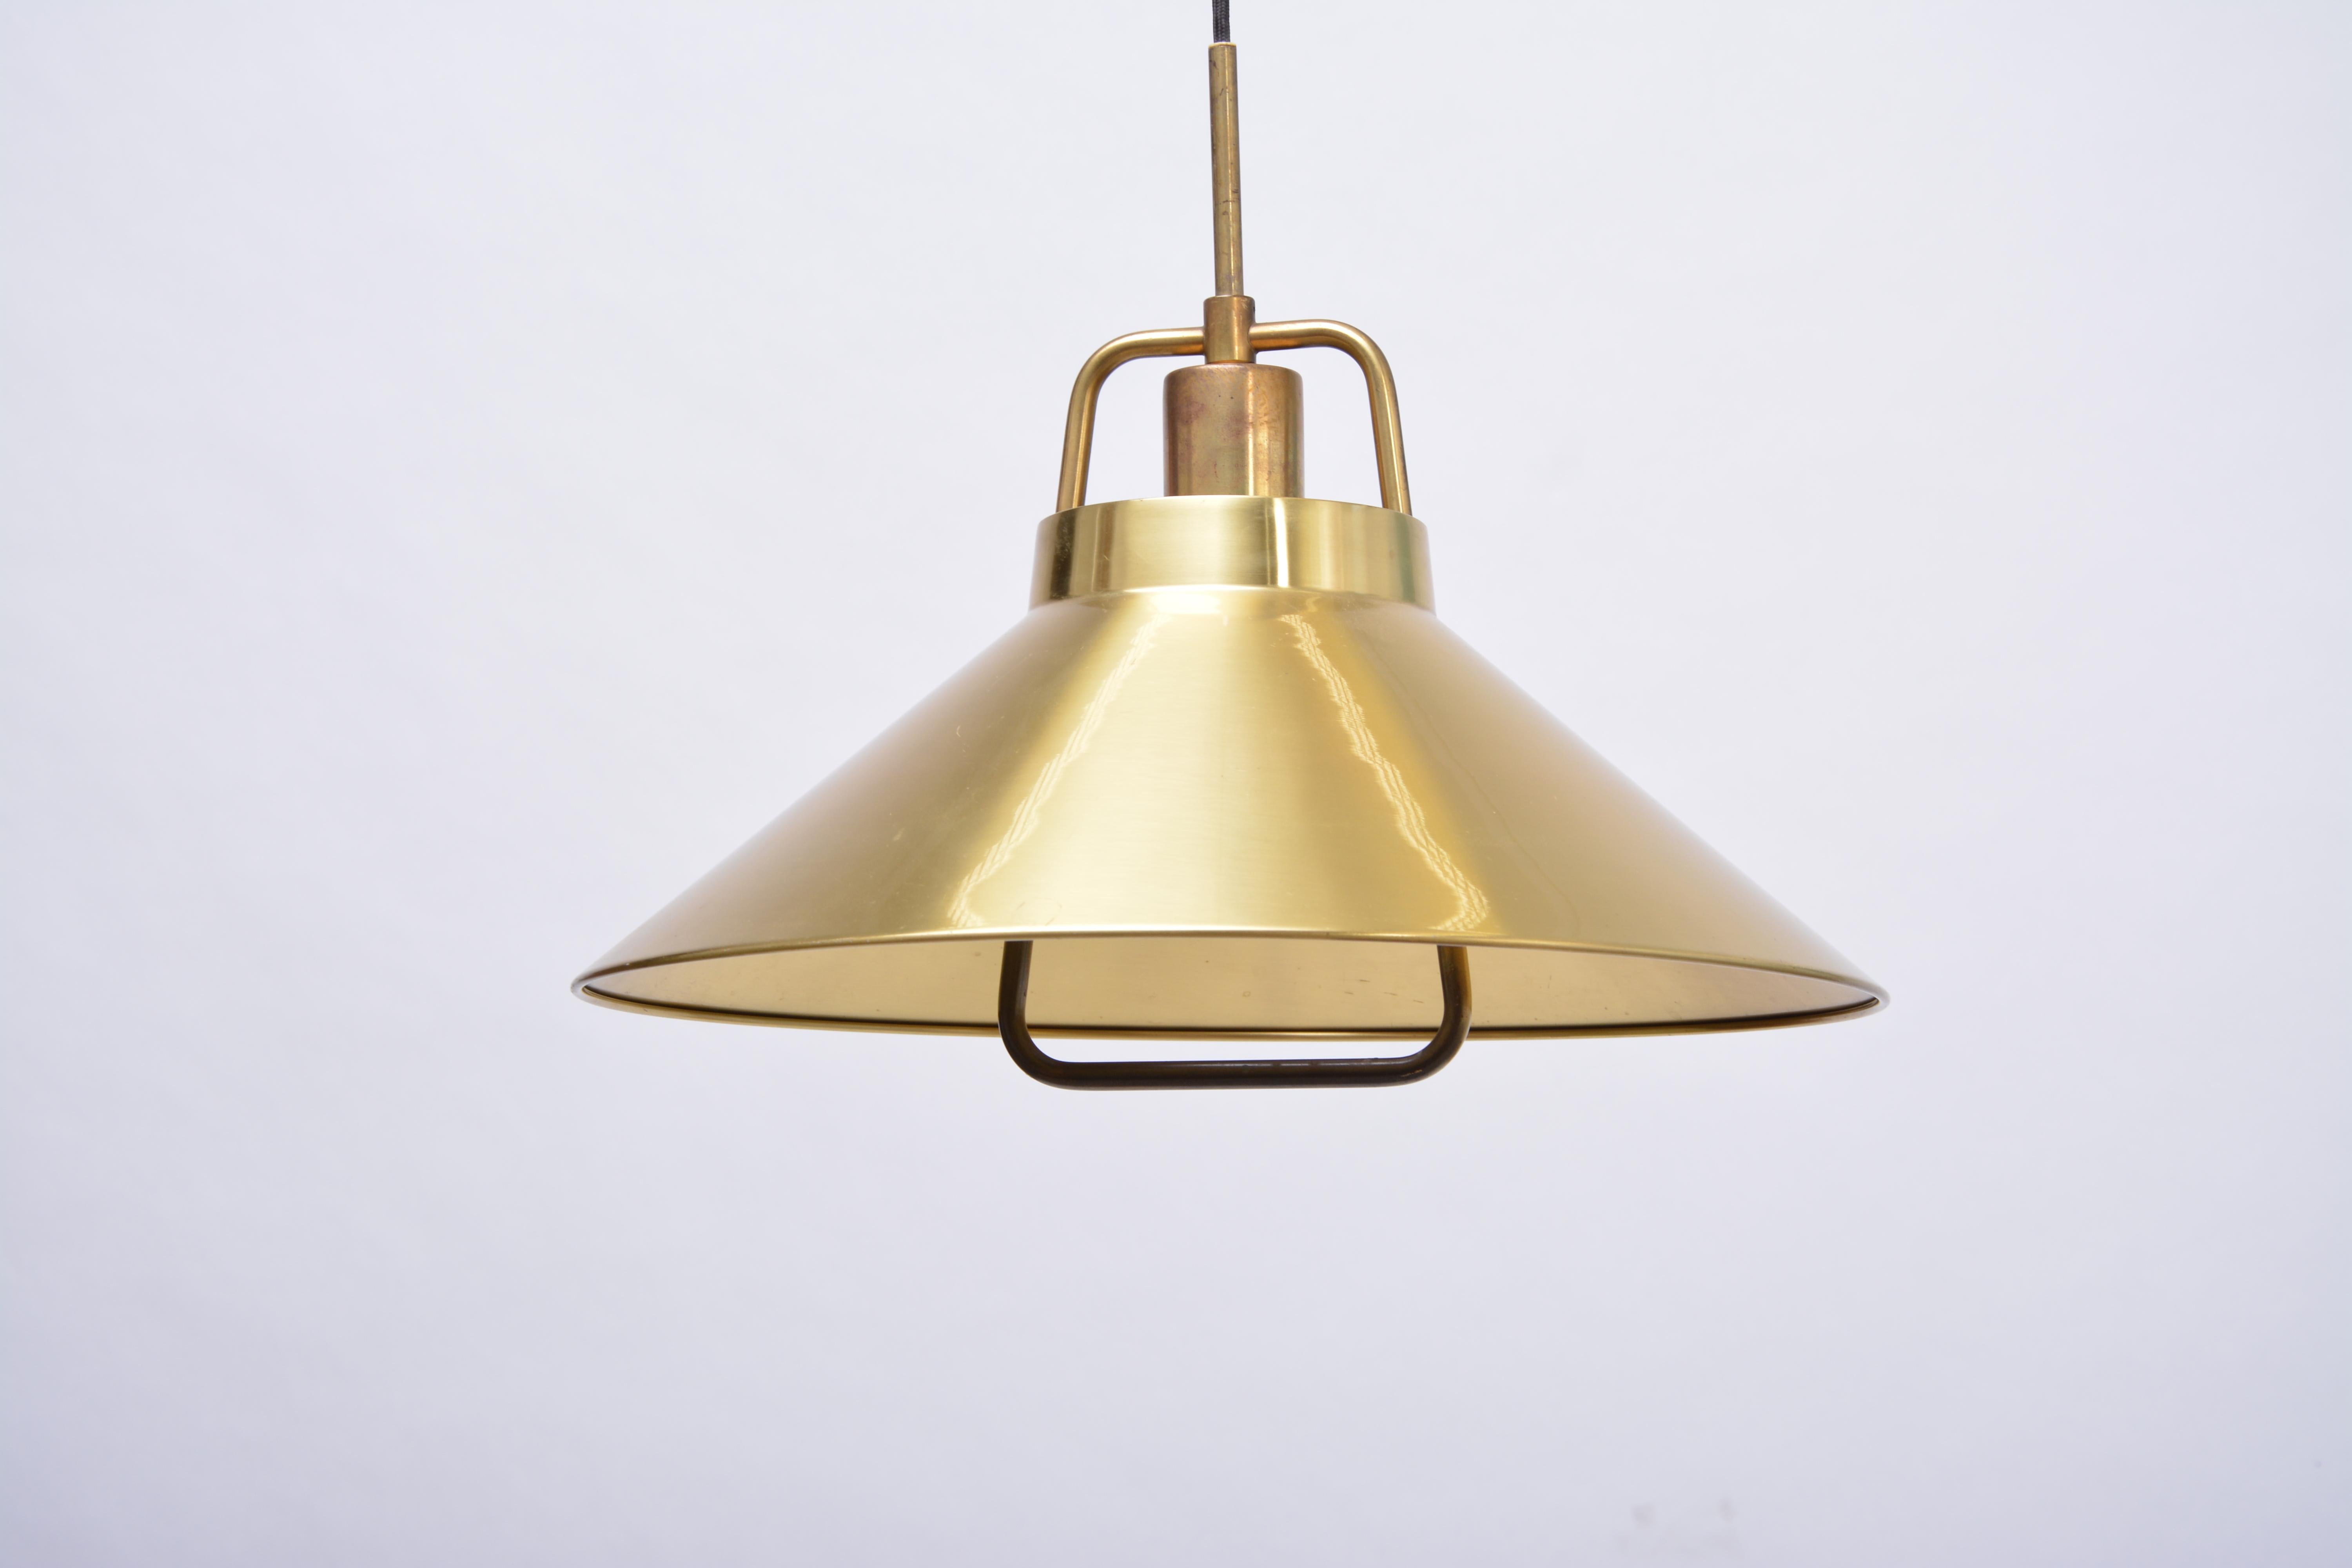 Danish Mid-Century Modern Brass Pendant by Lyfa, 1960s

This solid brass pendant light was produced by Danish company Lyfa in the 1960s.